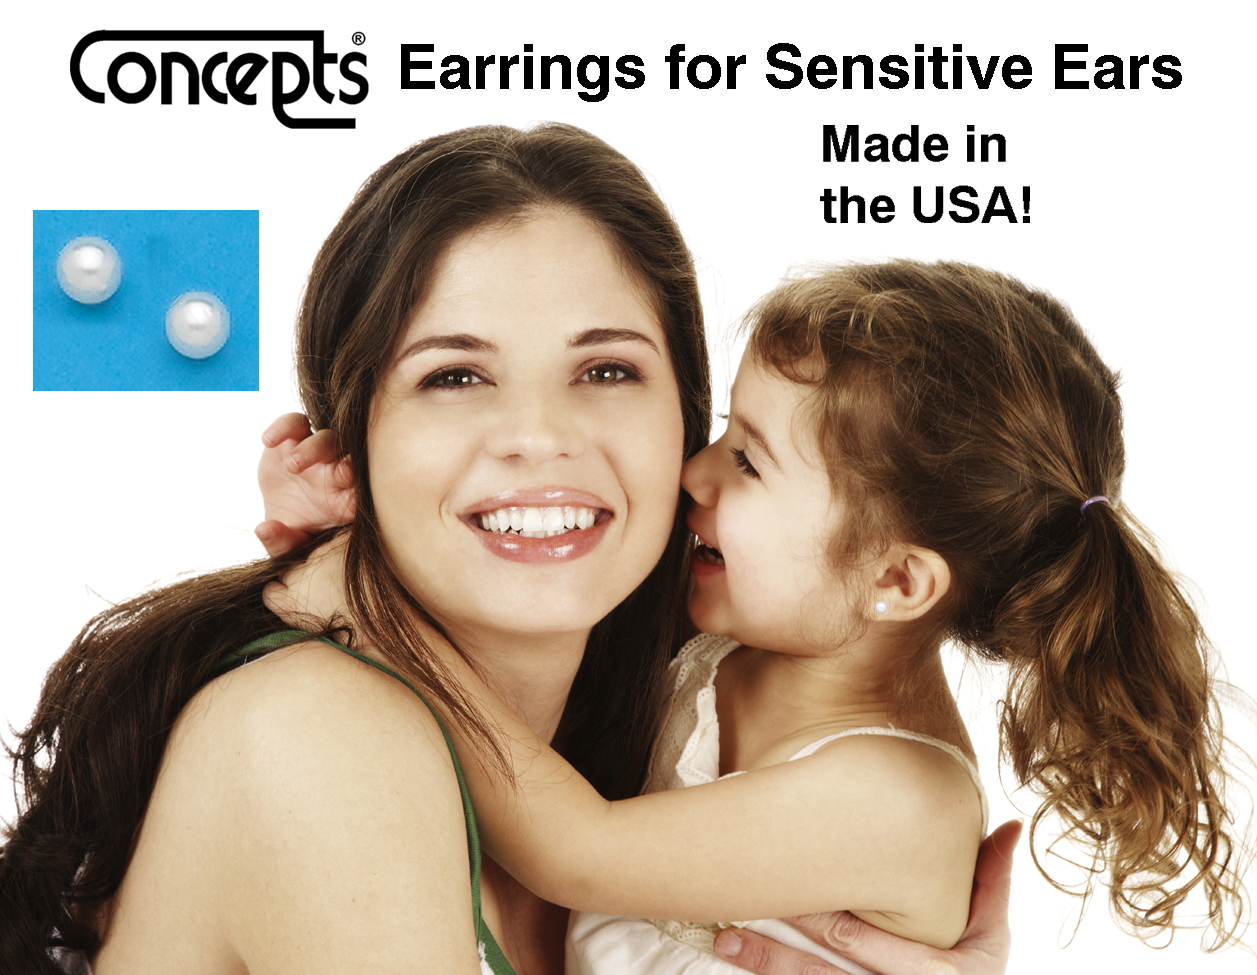 Concepts Earrings for Sensitive Ears & Jewelry Promotions